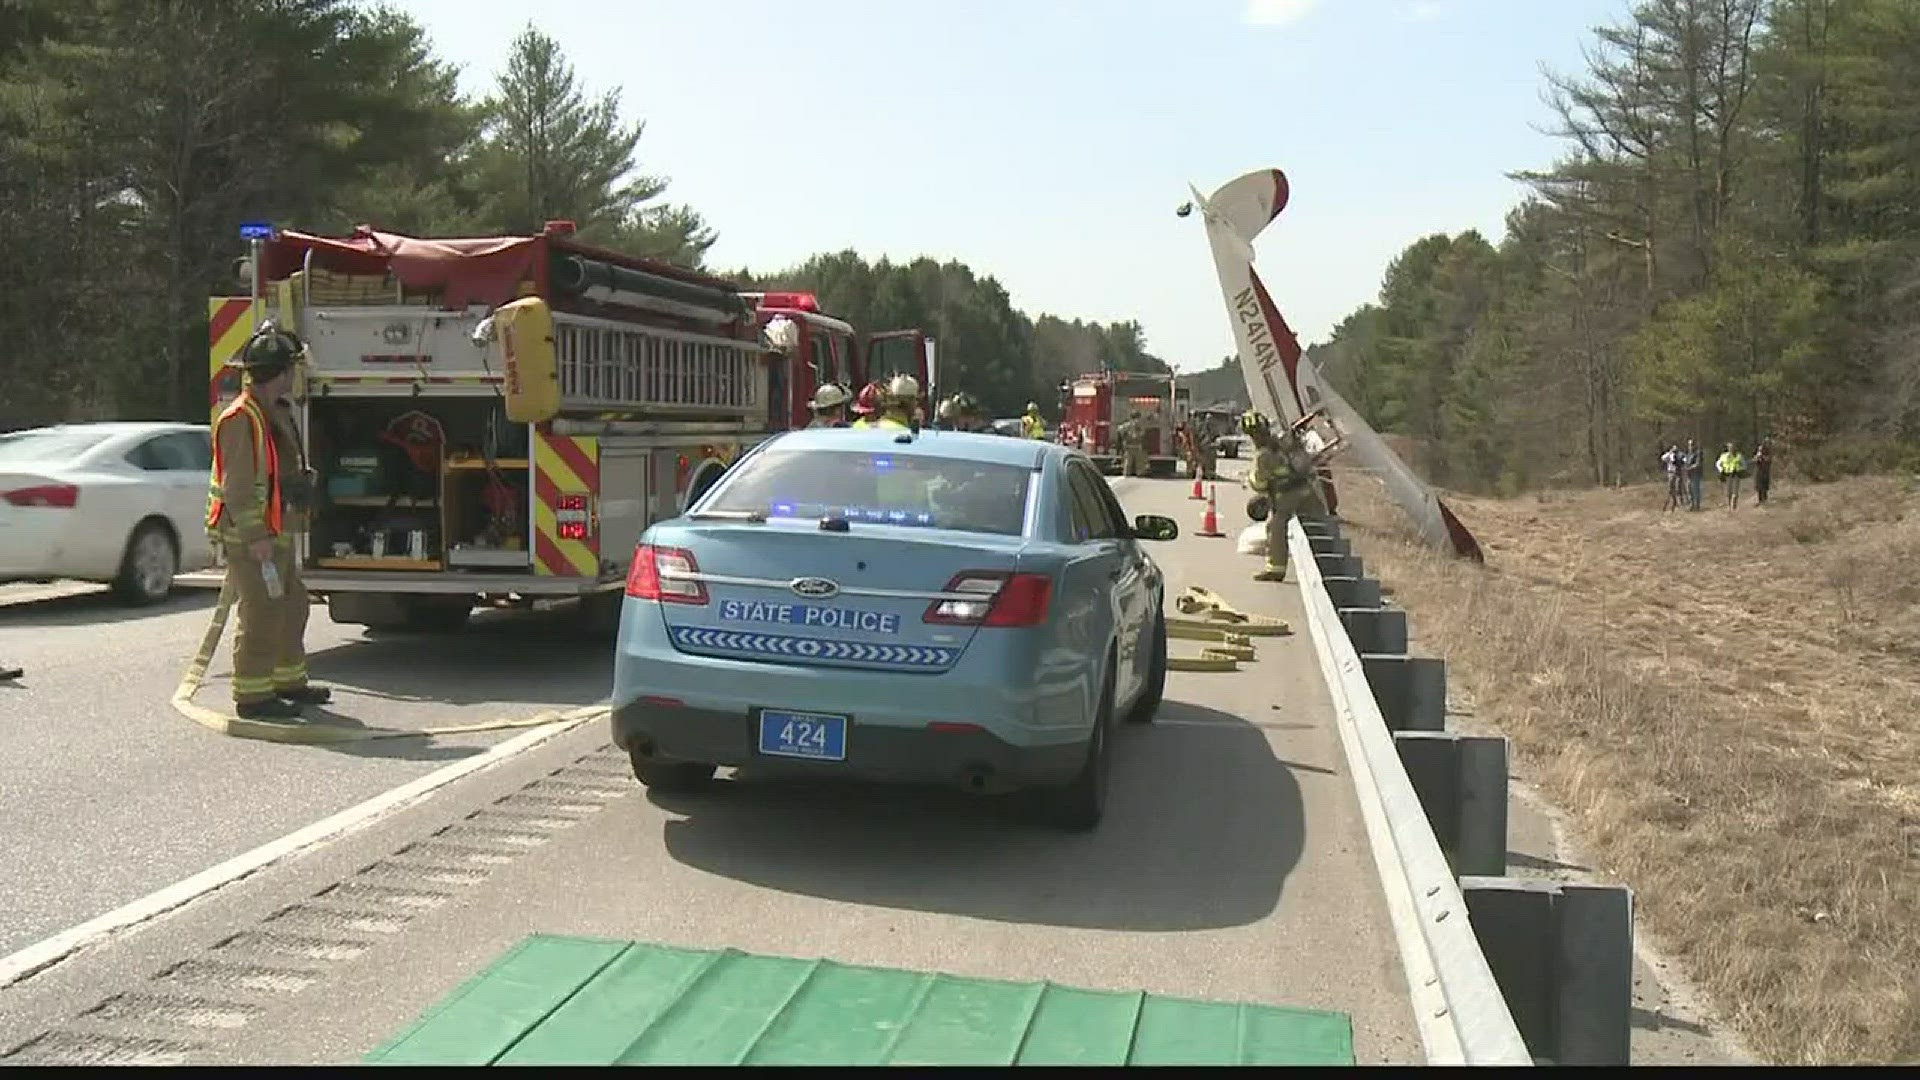 Plane crashes into guardrail on highway.